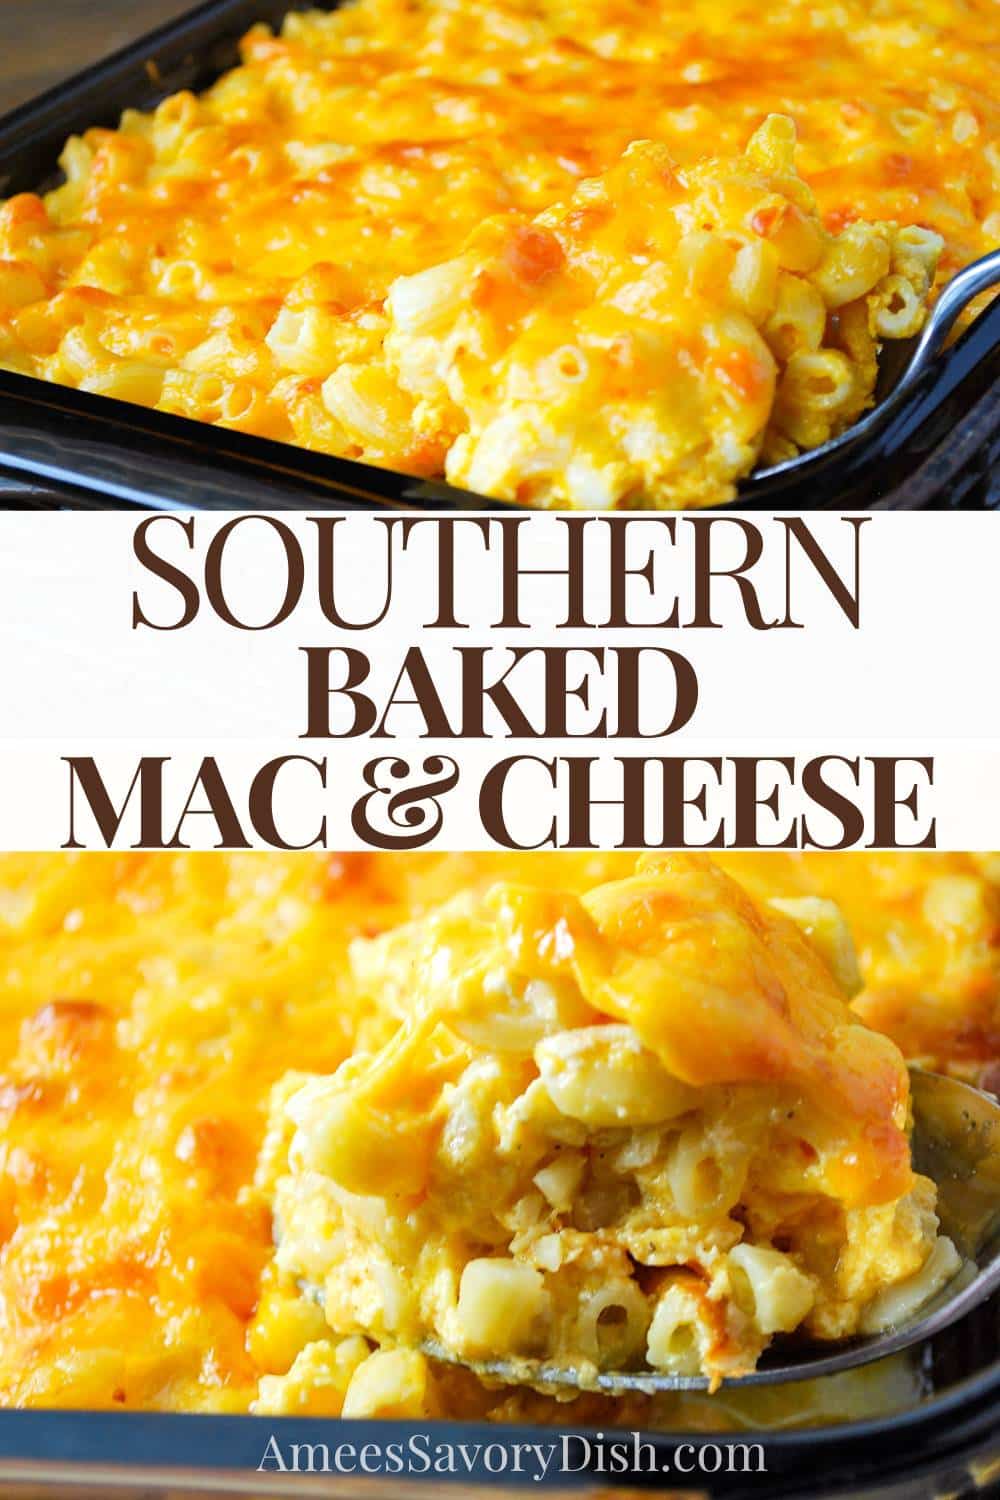 A deliciously rich & creamy baked mac & cheese recipe made with eggs, milk, sour cream, and double the cheddar. Lightened-up option included. via @Ameessavorydish